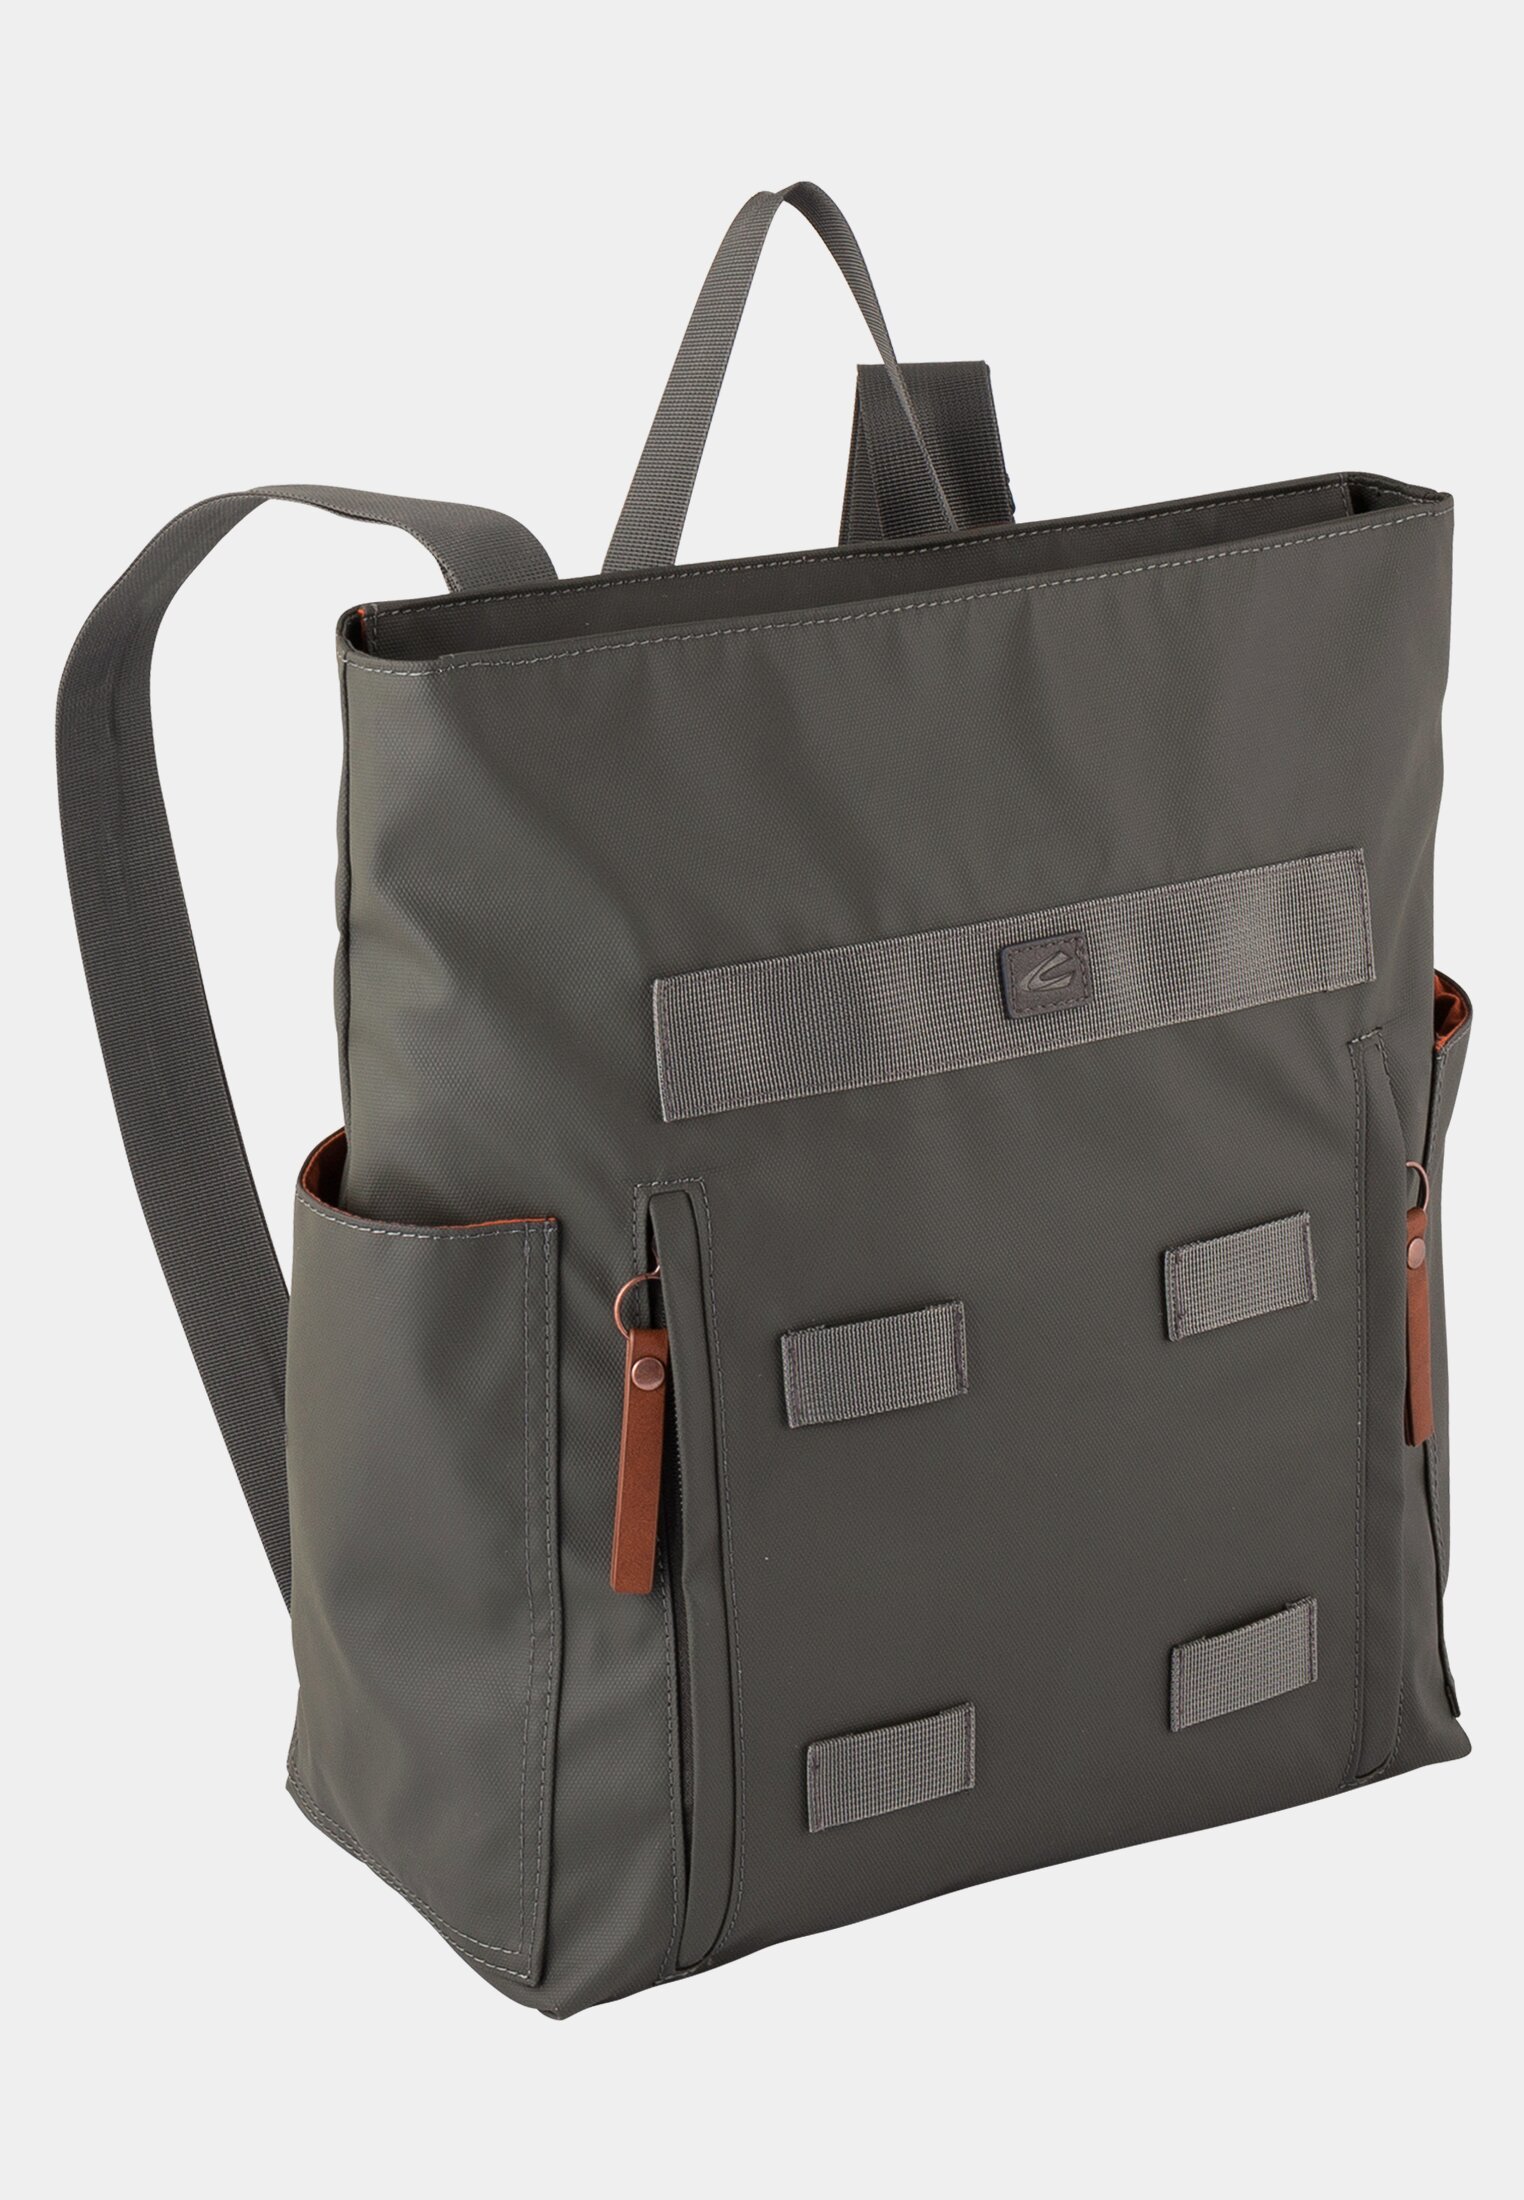 Camel Active Large backpack made from water-repellent nylon